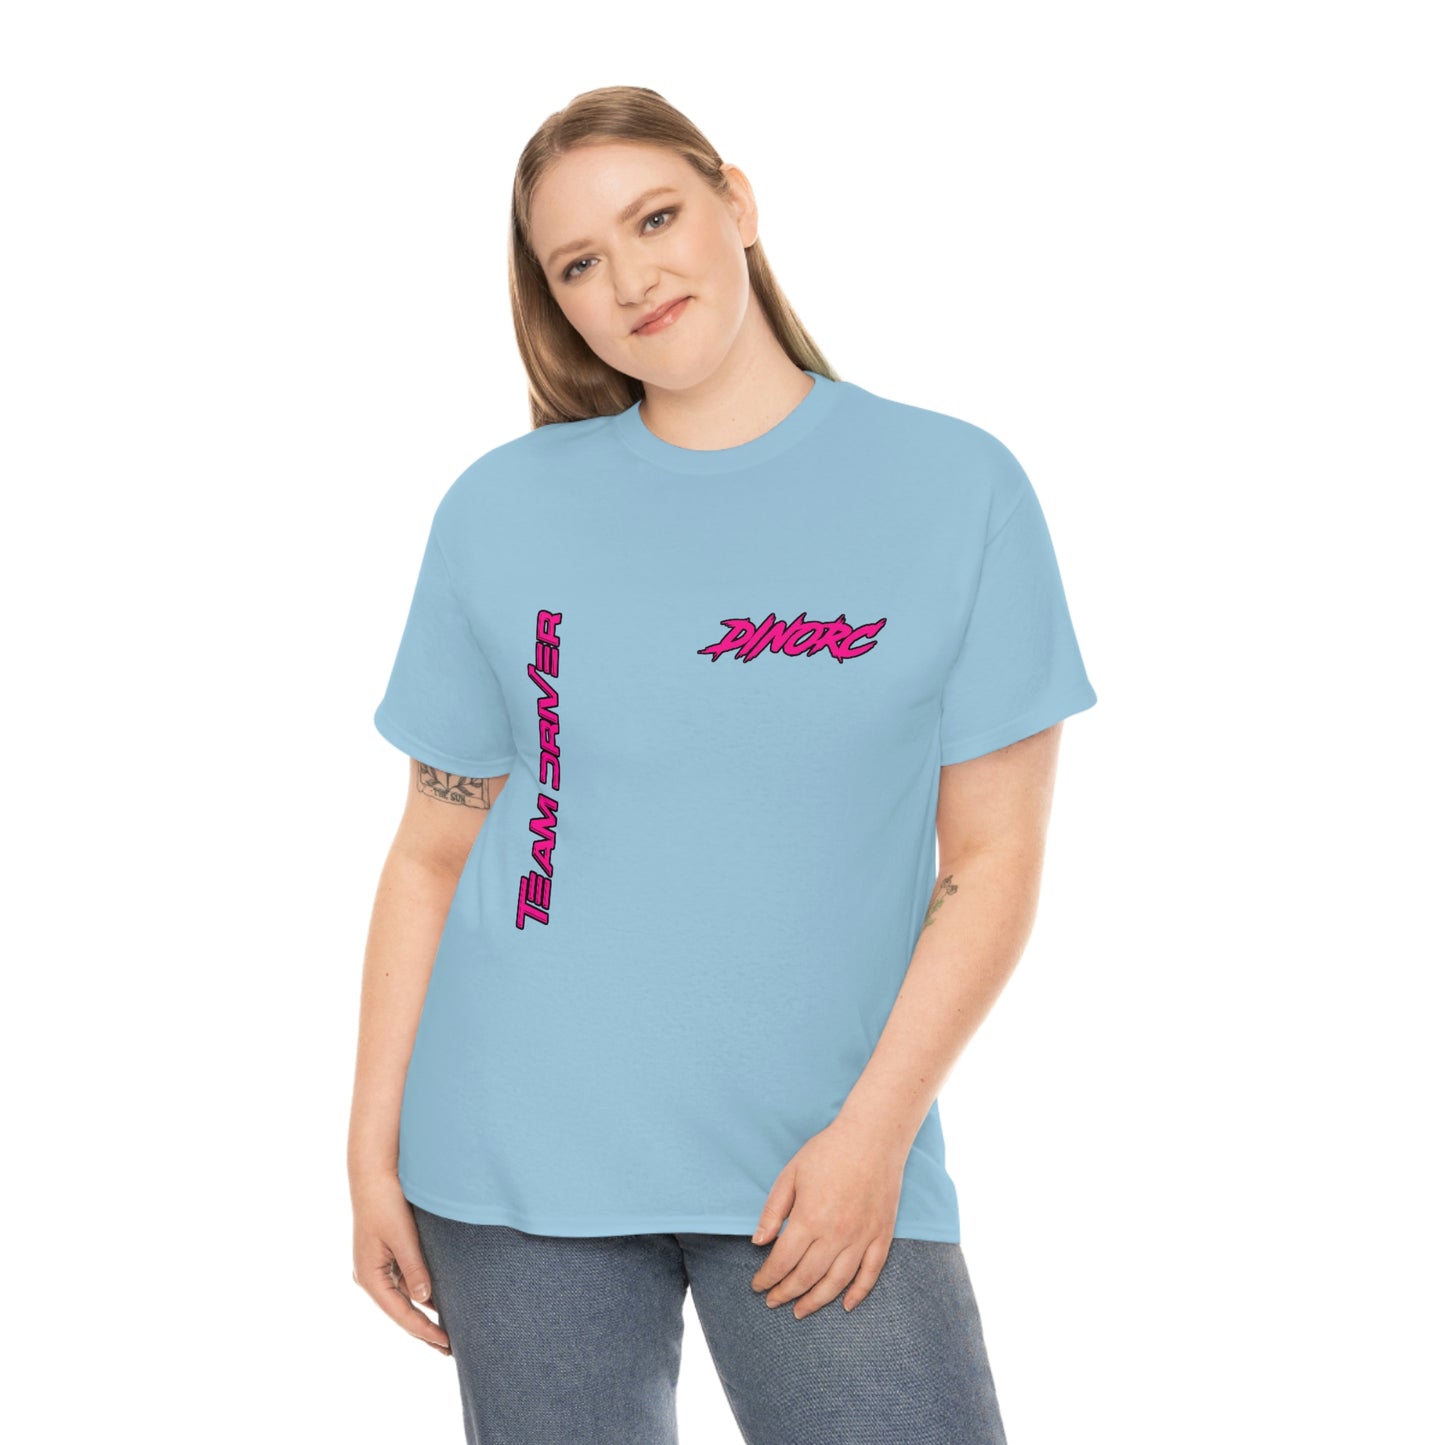 Vertical Team Driver Dino's Divas Front and Back DinoRc Logo T-Shirt S-5x 5 colors